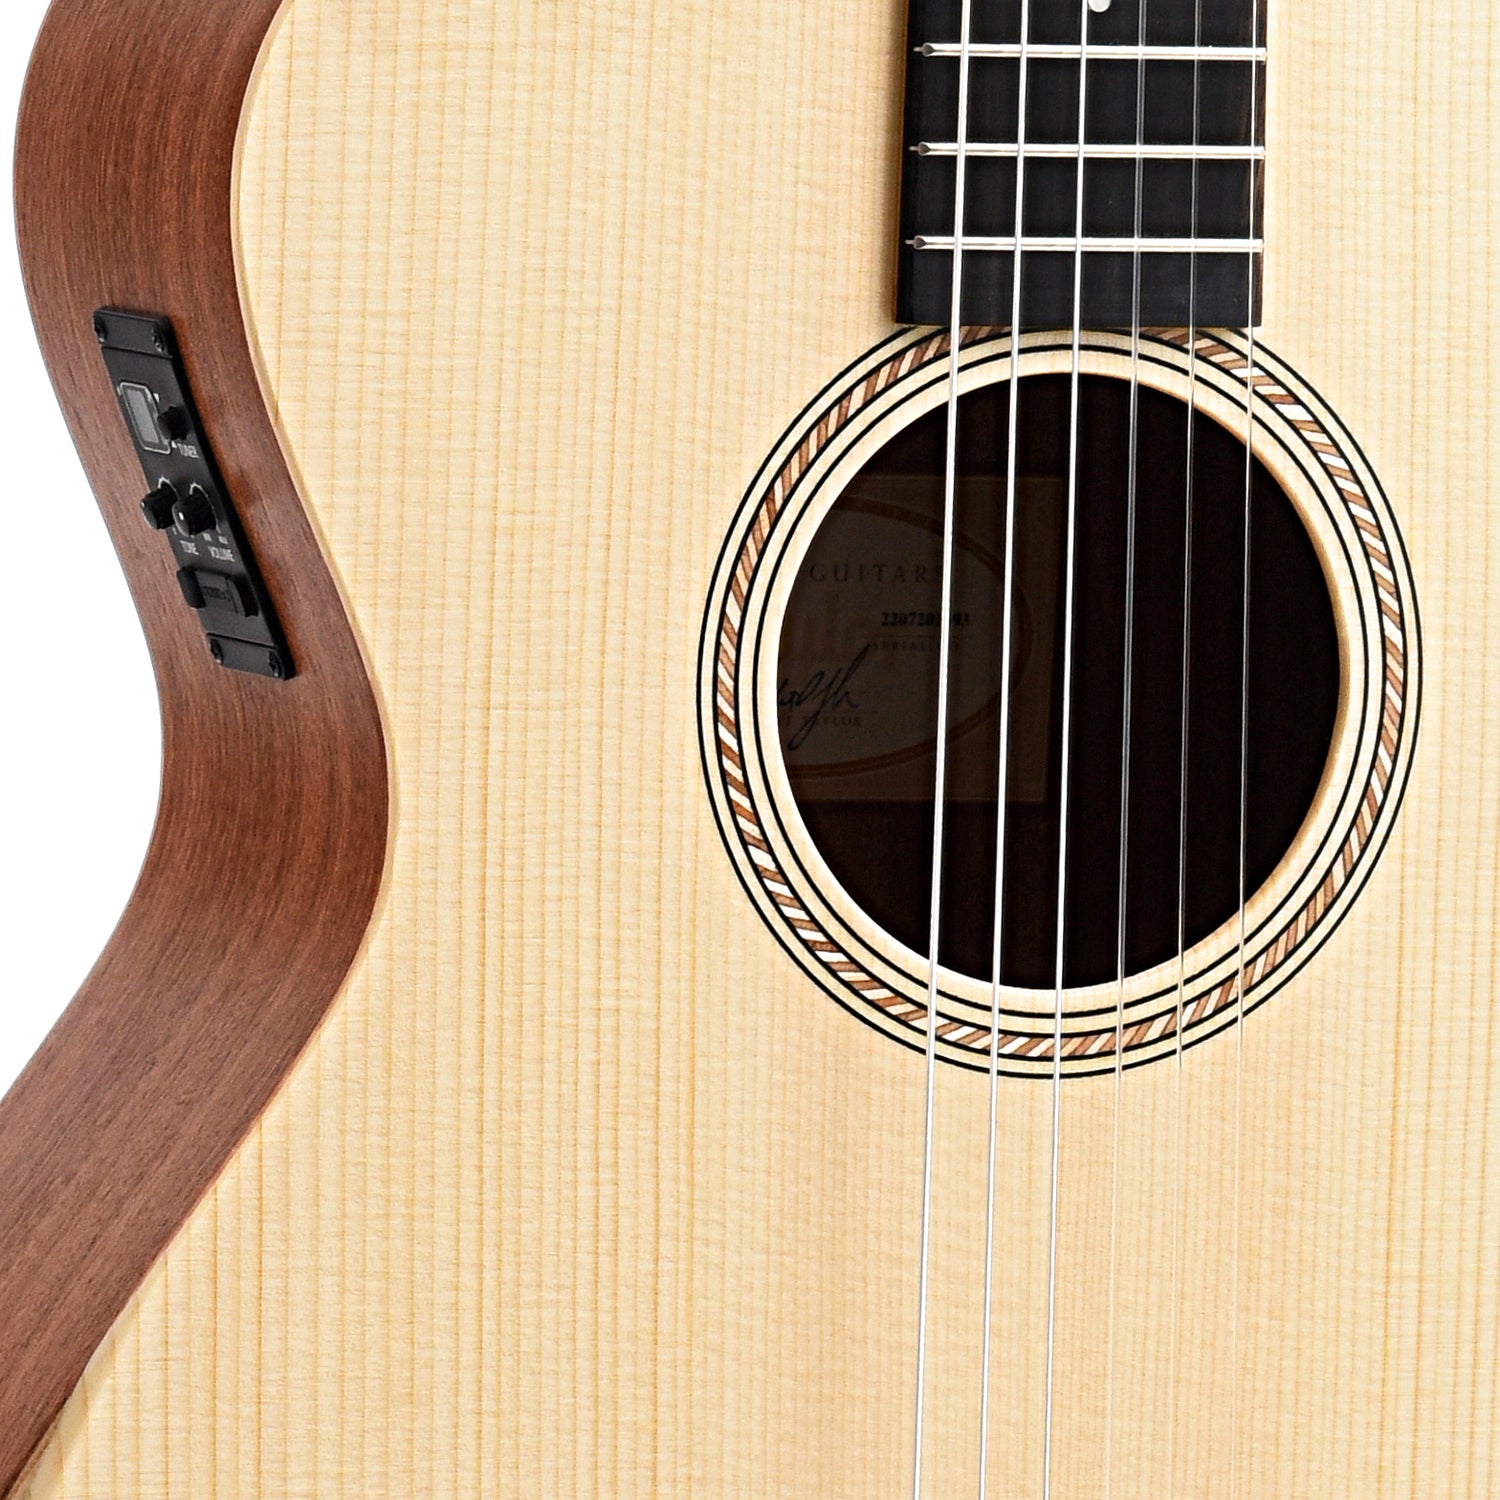 Sounhole and controls of Taylor Academy 12e-N Nylon String Acoustic